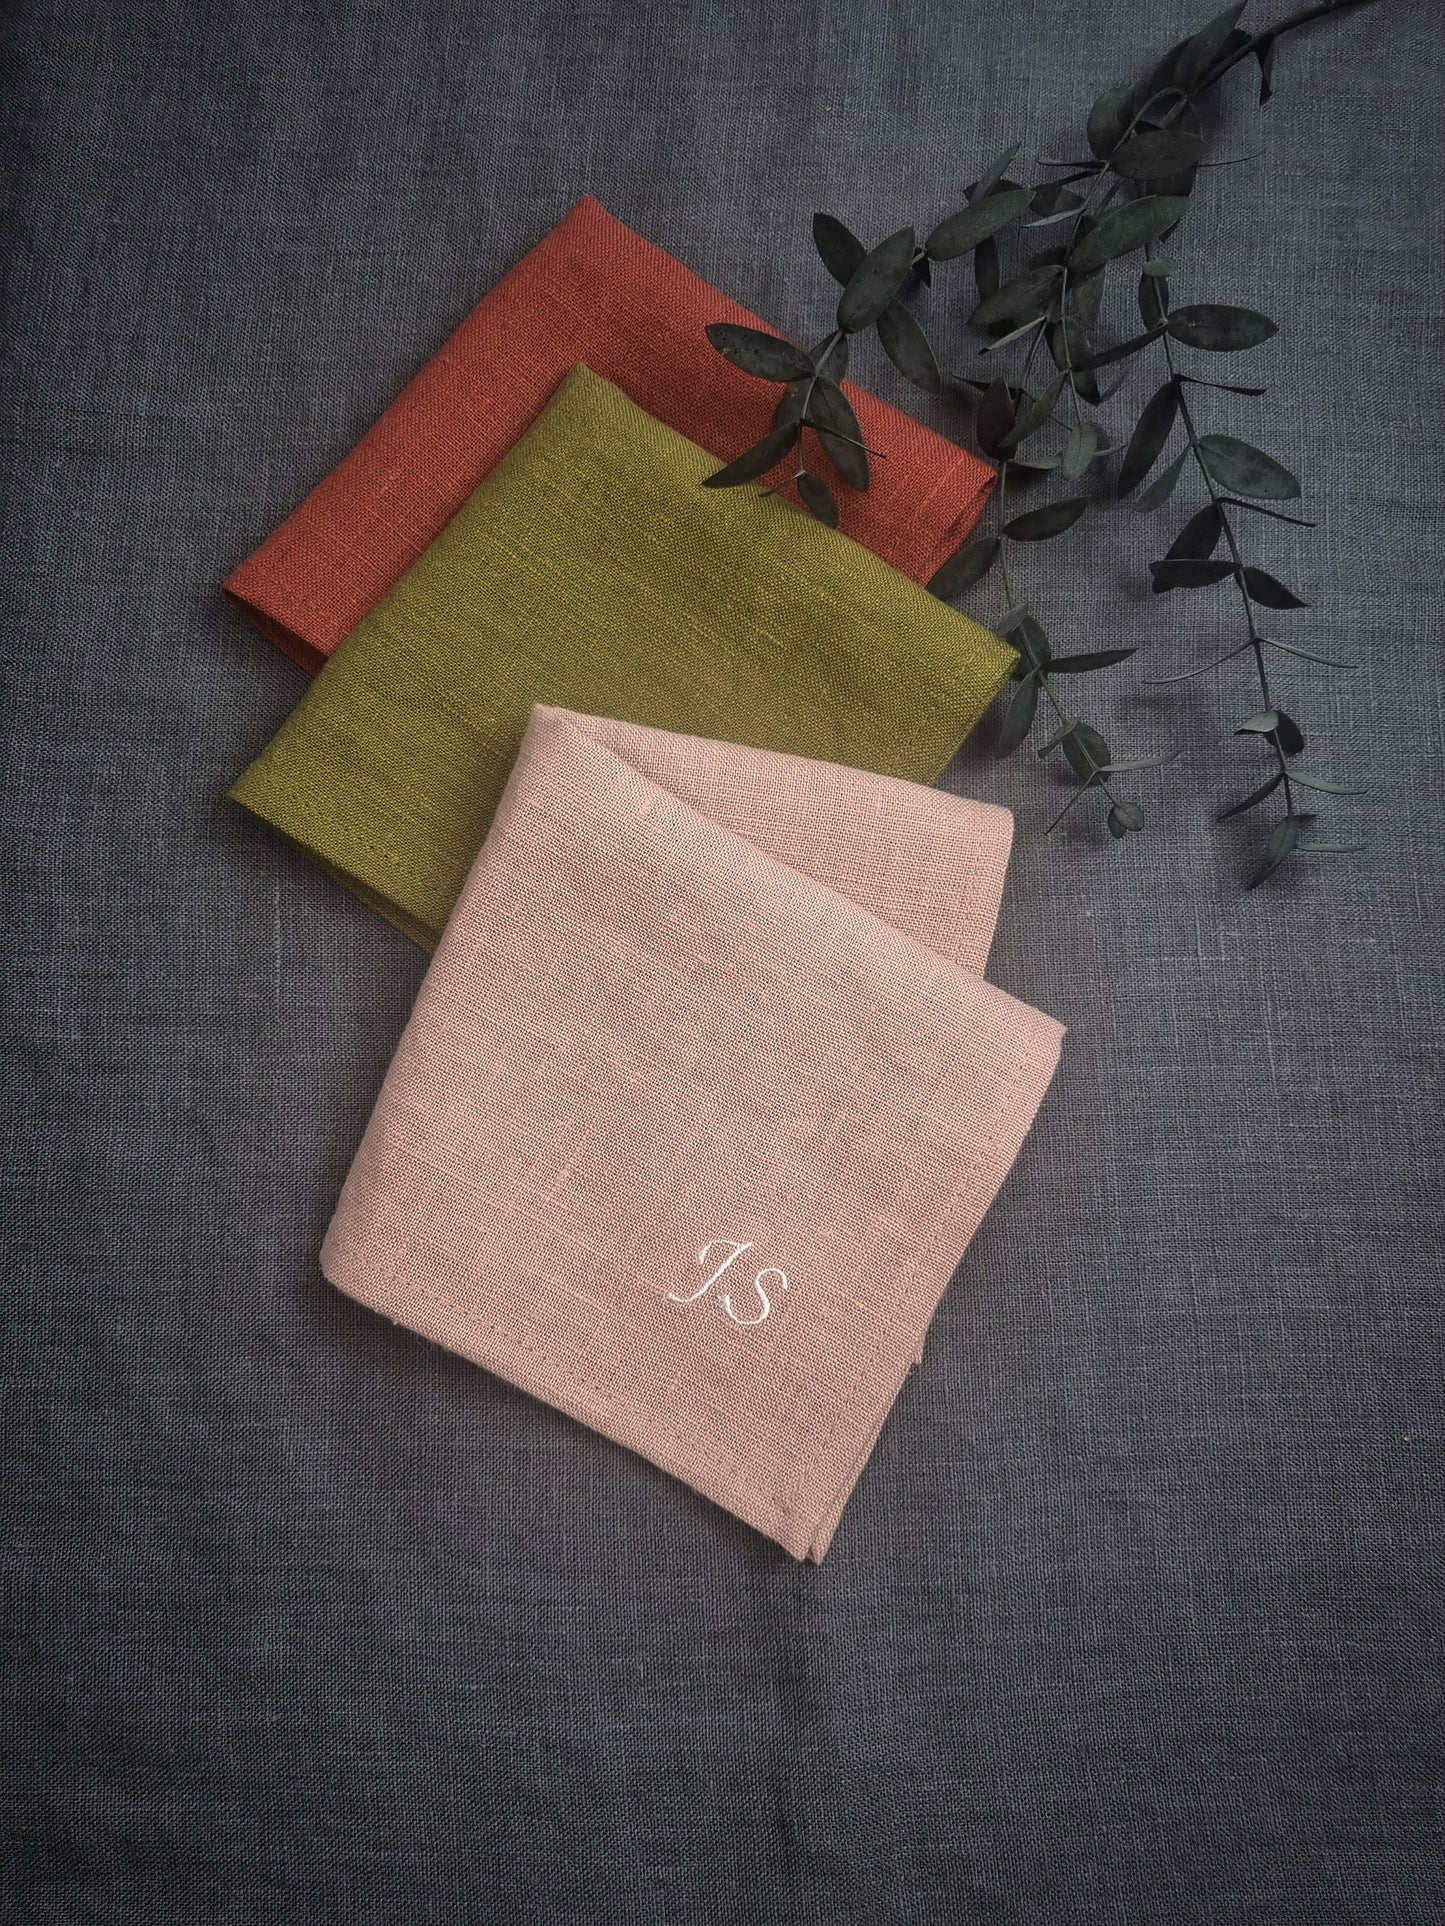 Personalised/Embroidered Natural linen handkerchiefs